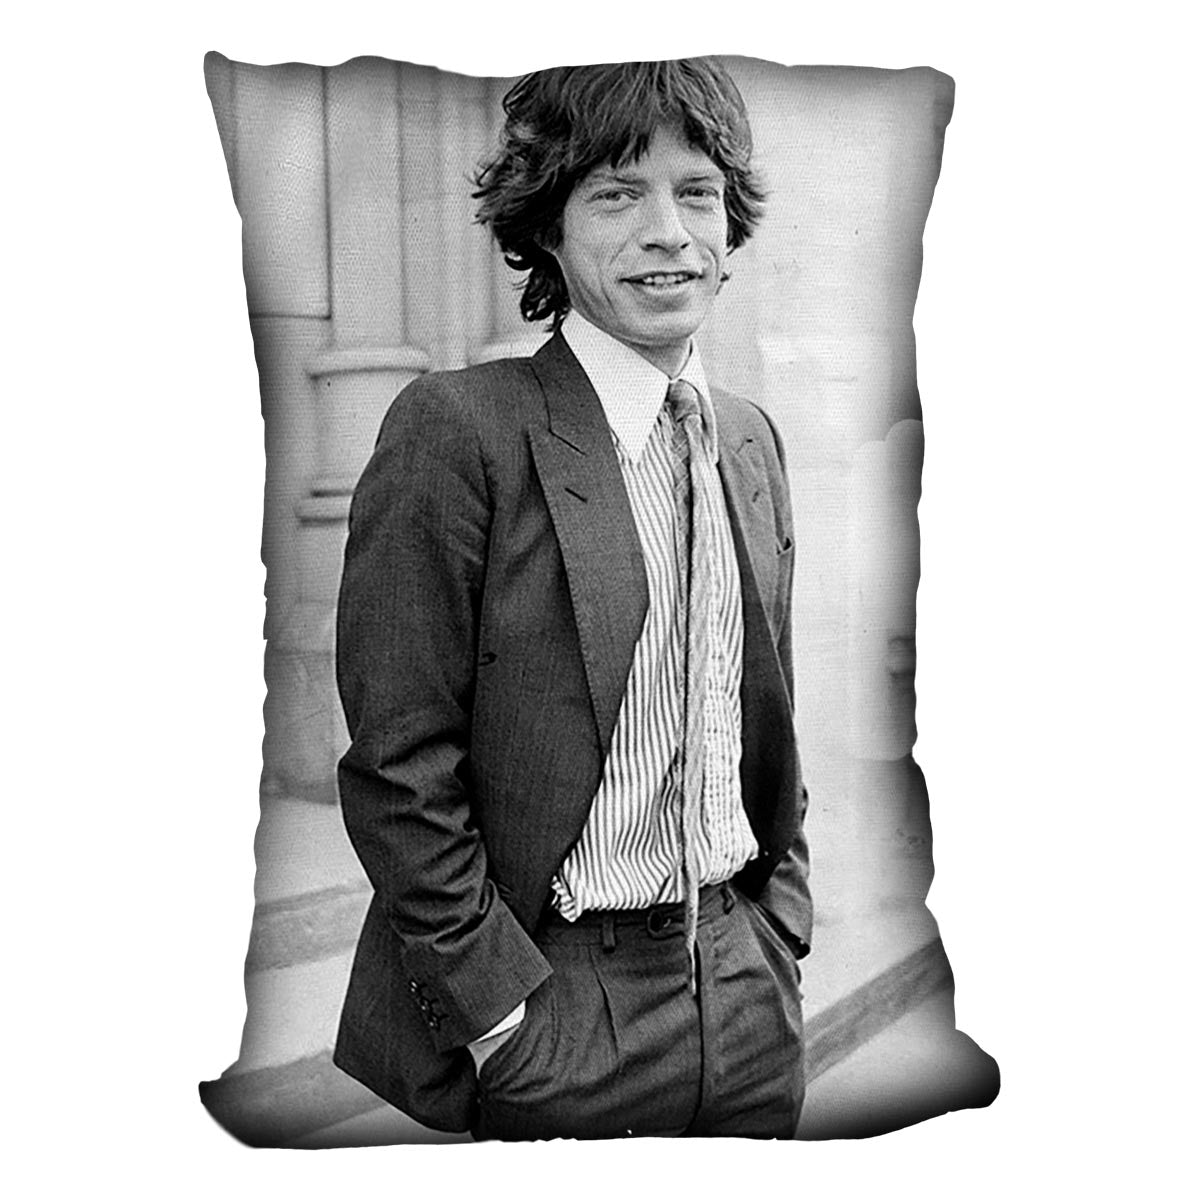 Mick Jagger in a tie Cushion